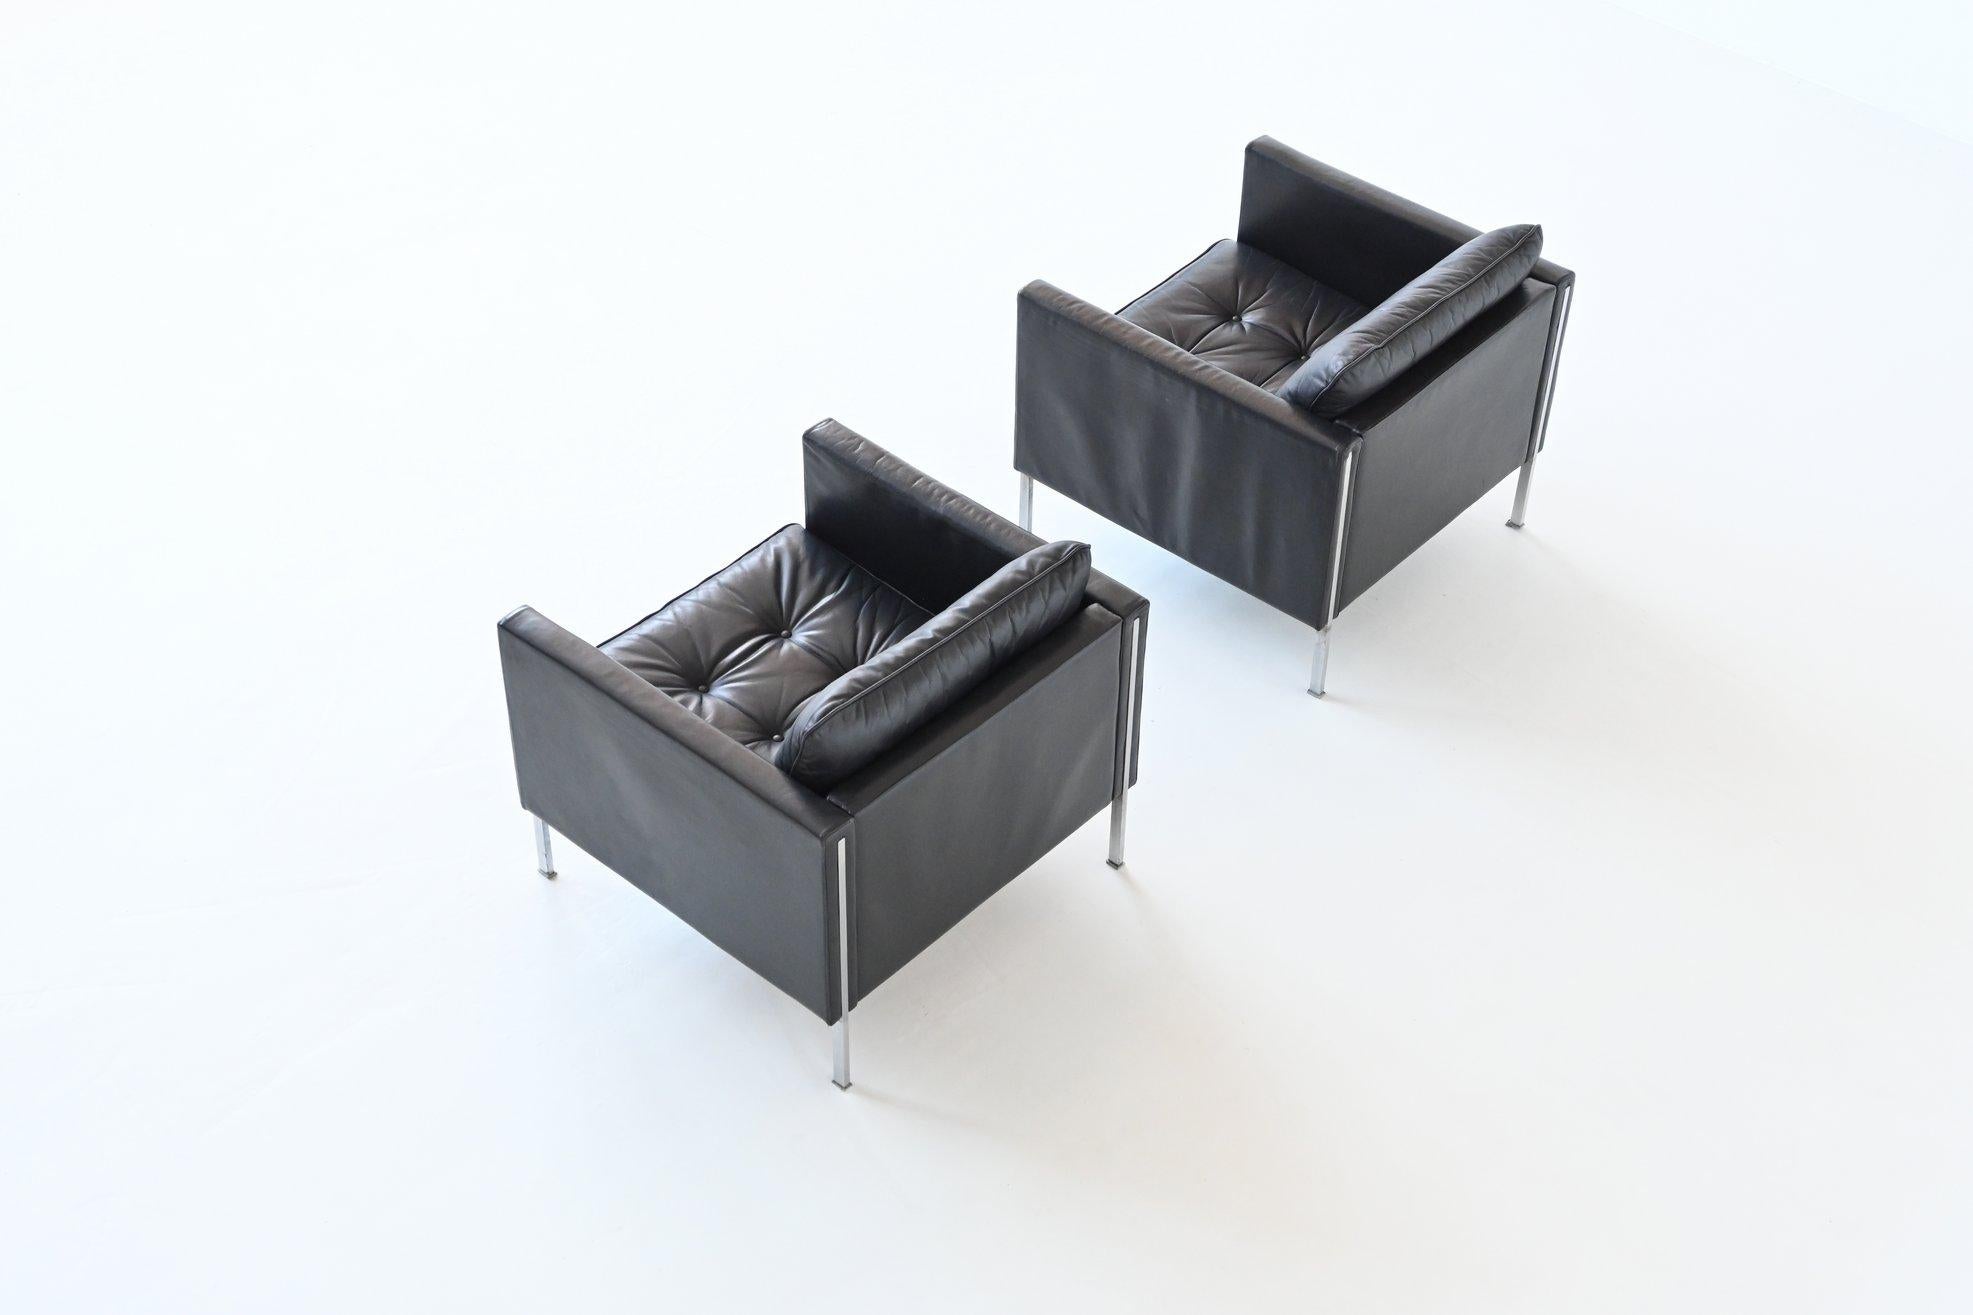 Mid-20th Century Pierre Paulin Model 442 Lounge Chairs Artifort the Netherlands, 1962